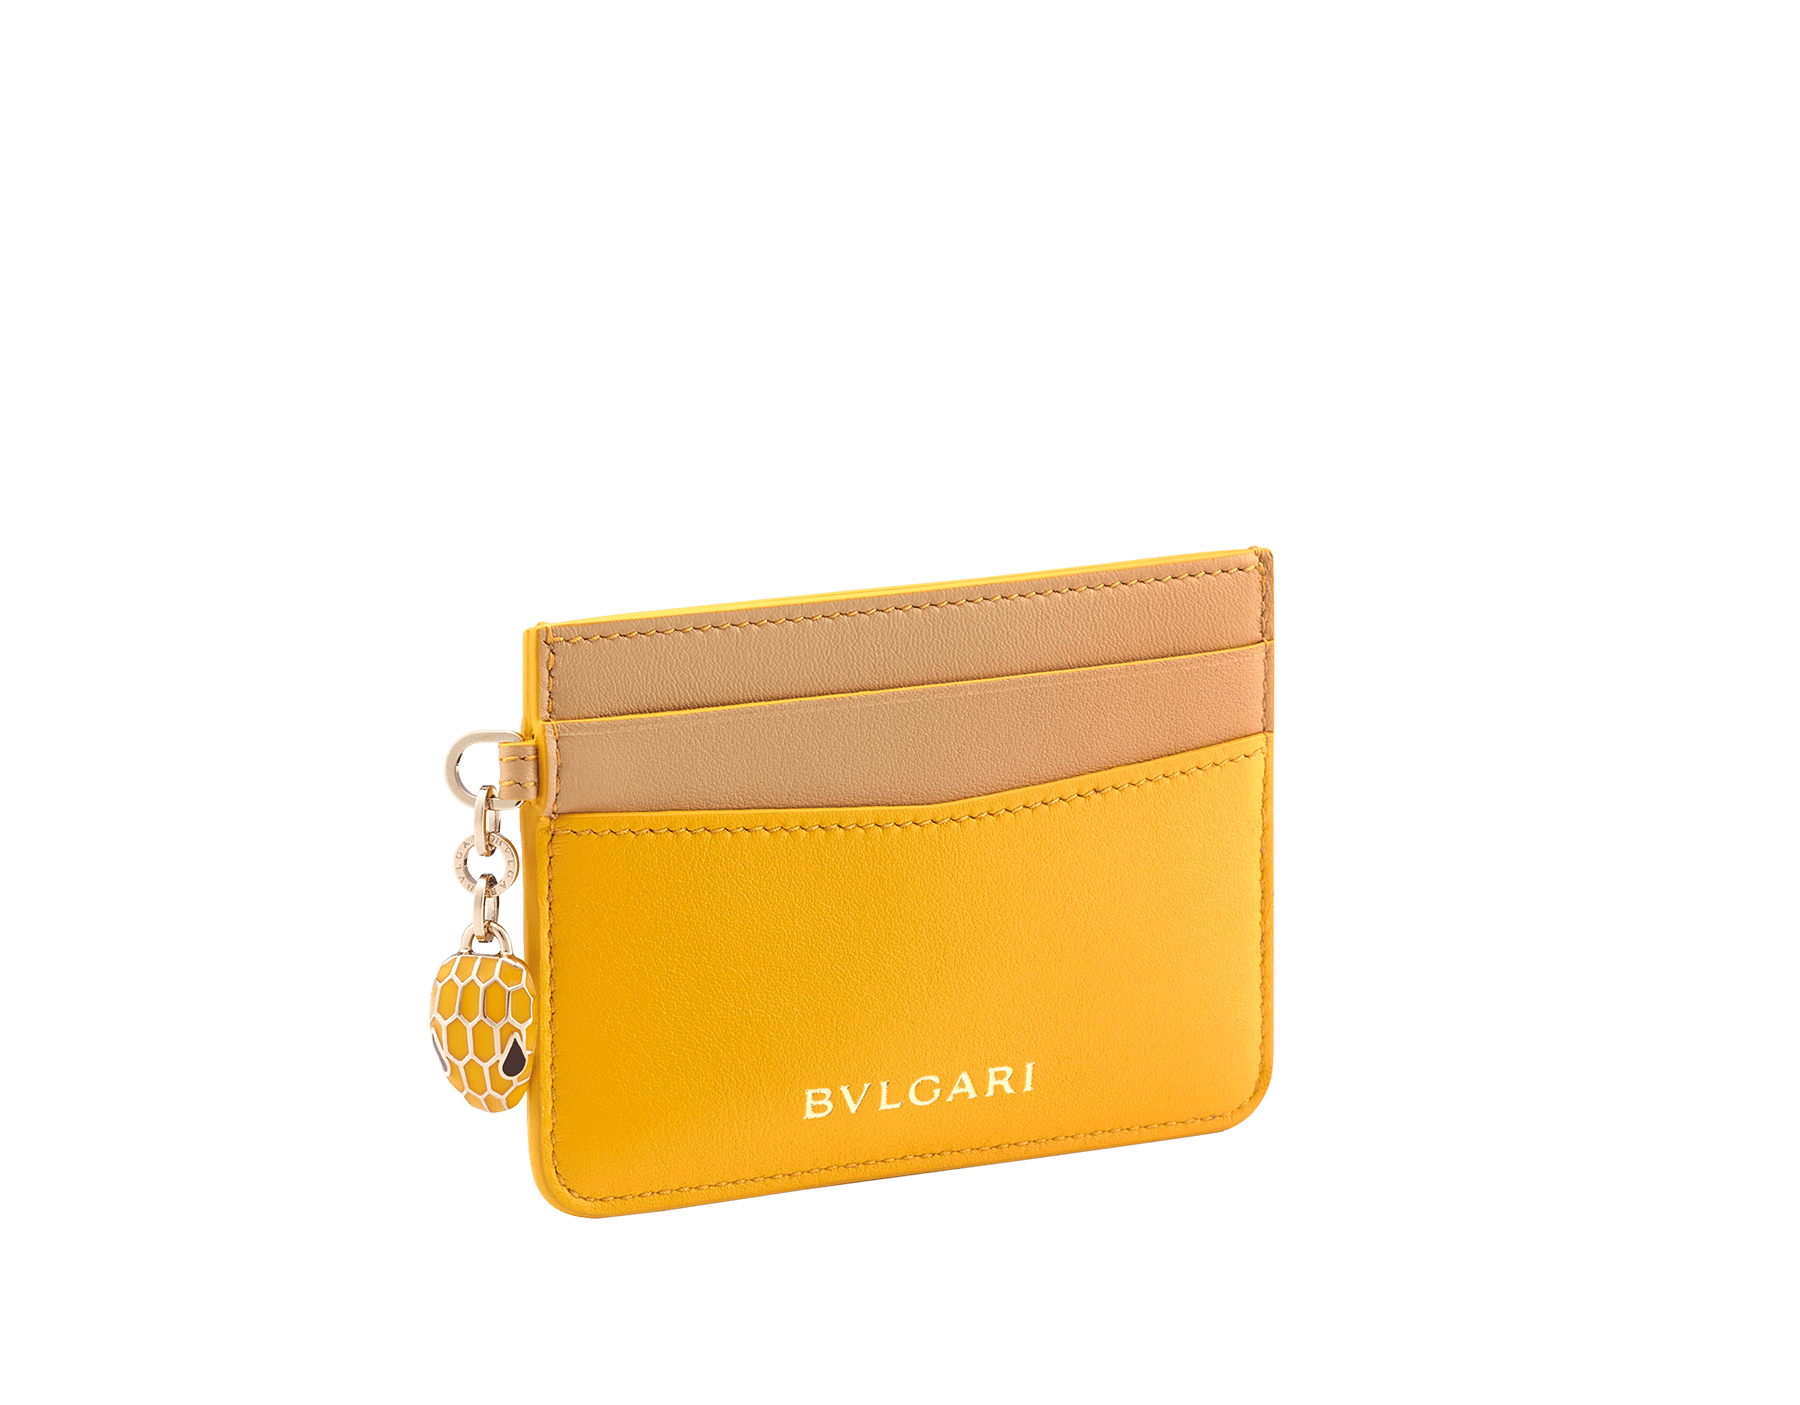 "Serpenti Forever" card holder in Blush Quartz pink calf leather and Deep Garnet bordeaux nappa leather. Tempting light gold plated brass snakehead charm, finished with matte Blush Quartz pink enamel, and black enamel eyes. SEA-CC-HOLDER-CLb image 1